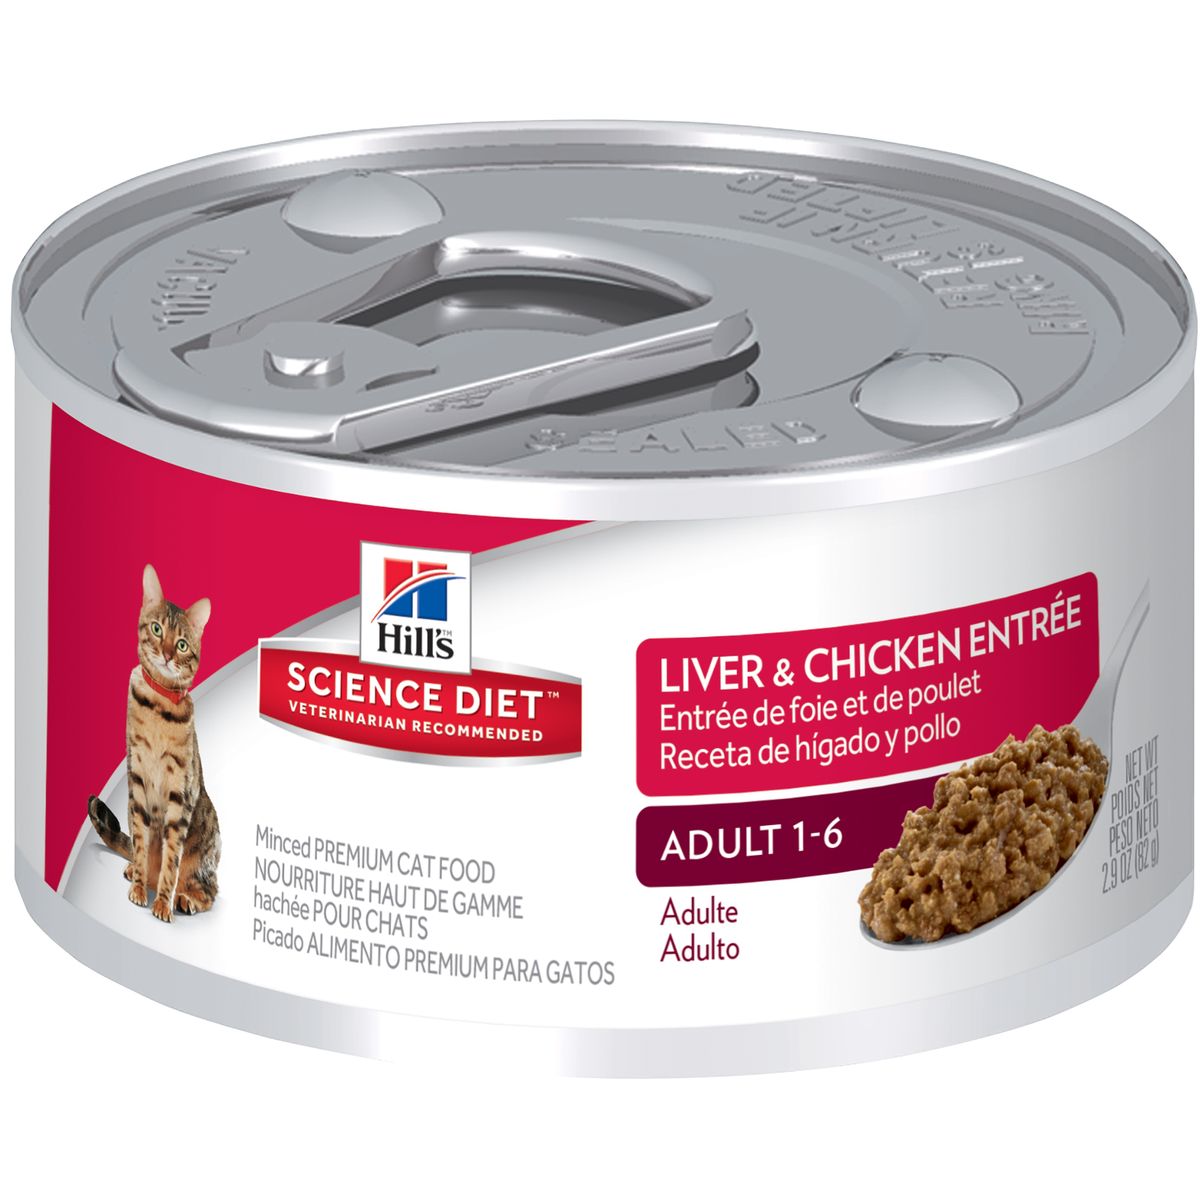 What Stores Sell Science Diet Cat Food